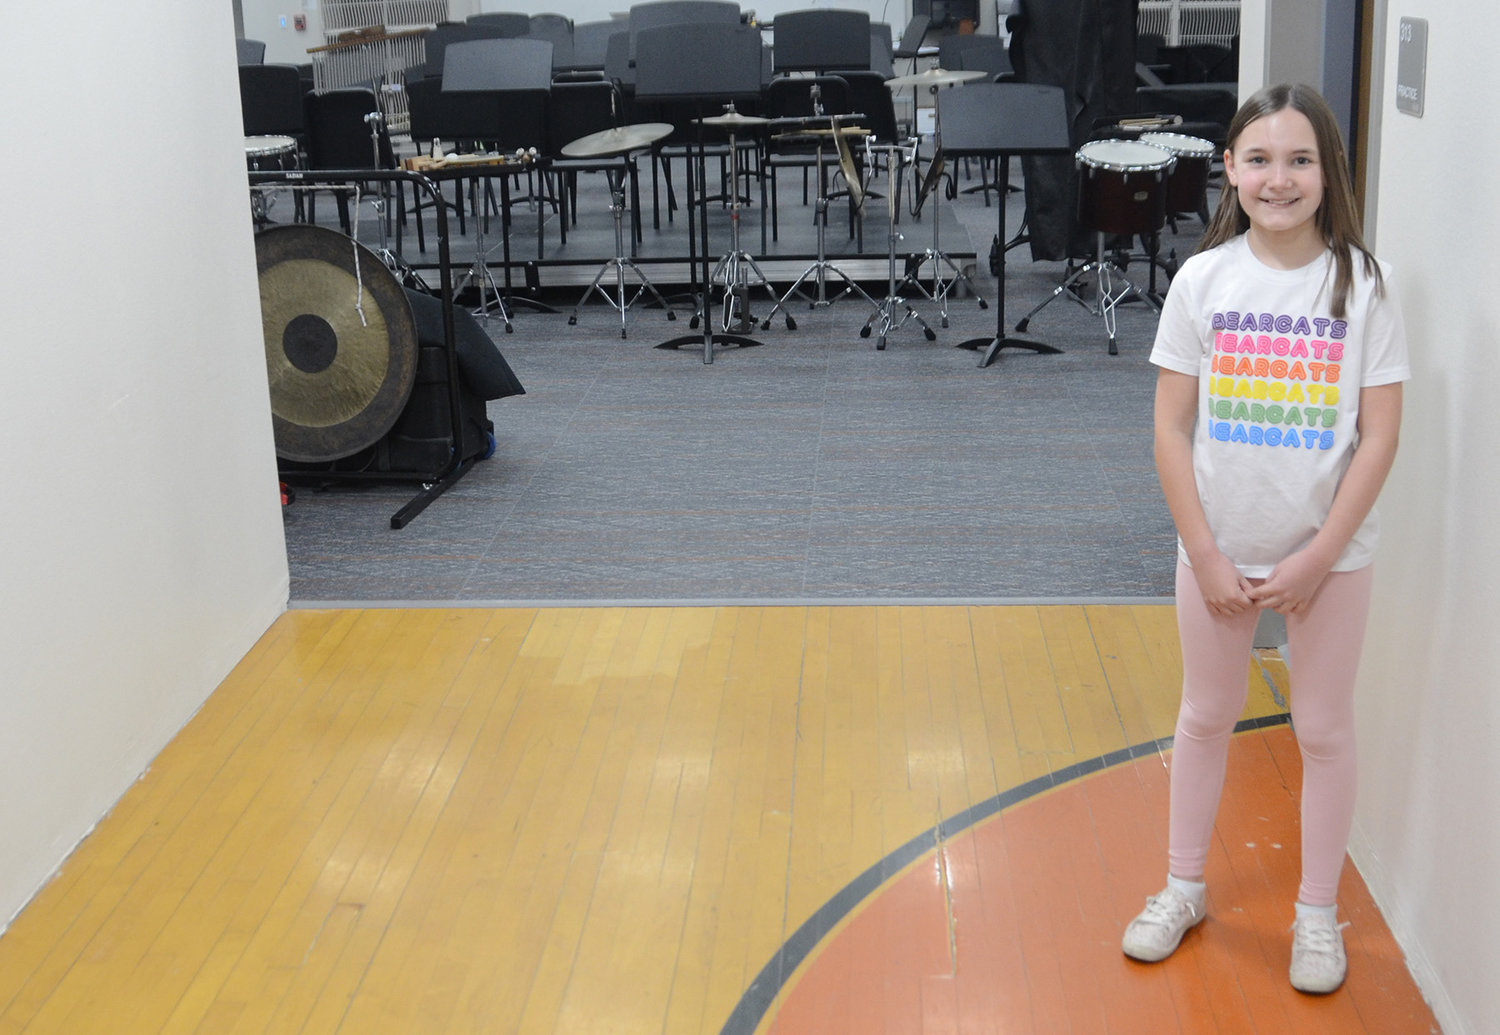 With a newly built gym and the original Multi Purpose Center gym remodeled, the band hall was built on the location of the old gym. Sixth-grade clarinet player Lily Elgin stands on the original gym floor in the entrance of the new music hall.